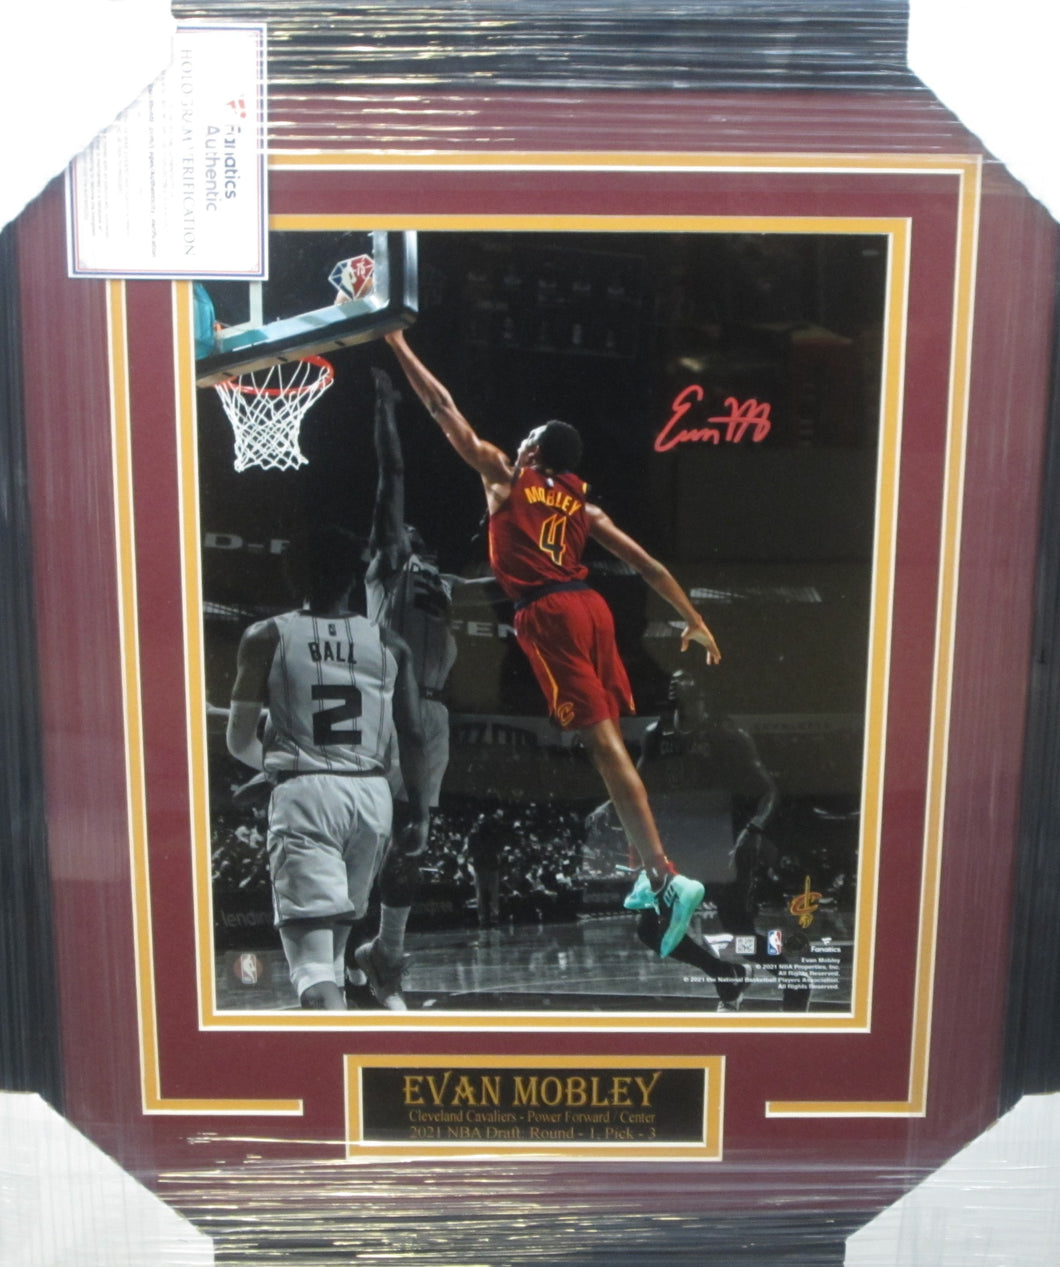 Cleveland Cavaliers Evan Mobley Signed 11x14 Photo Framed & Matted with FANATICS Authentic COA